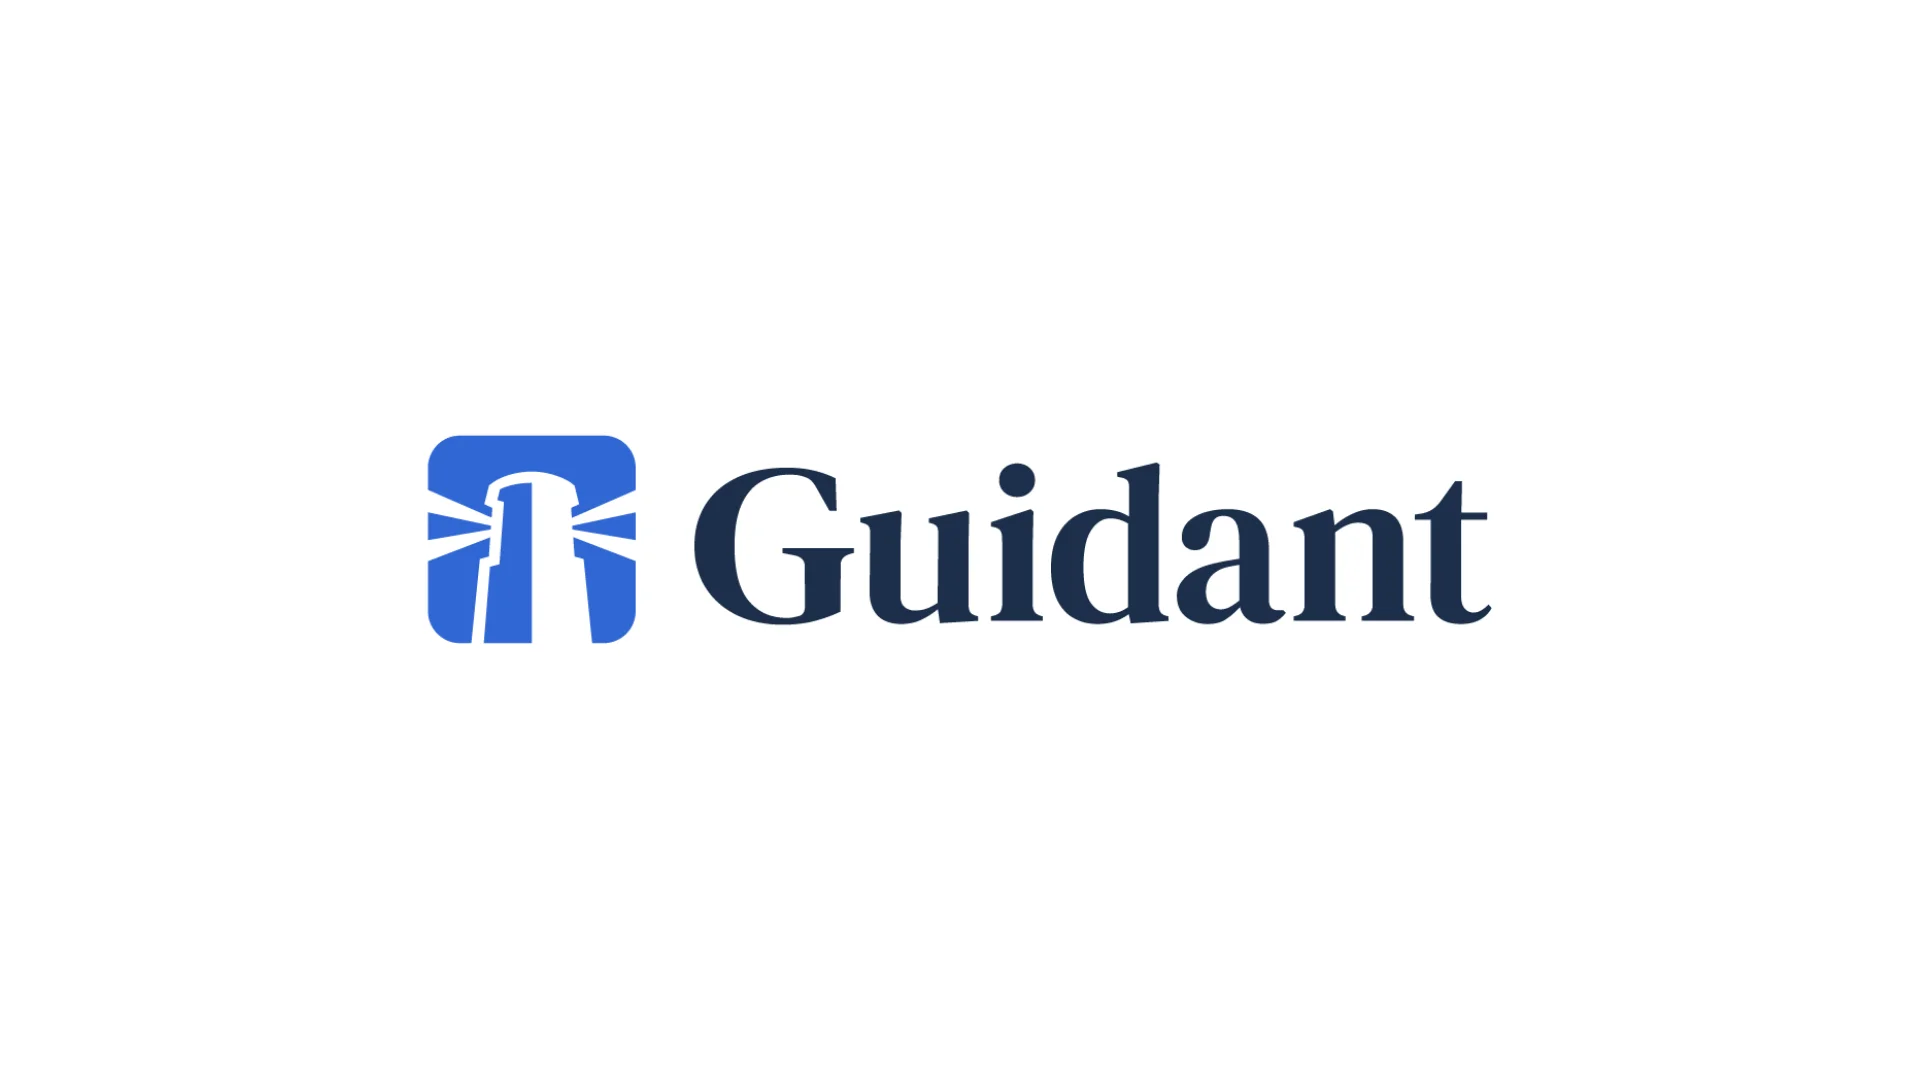 State of Small Business - Guidant